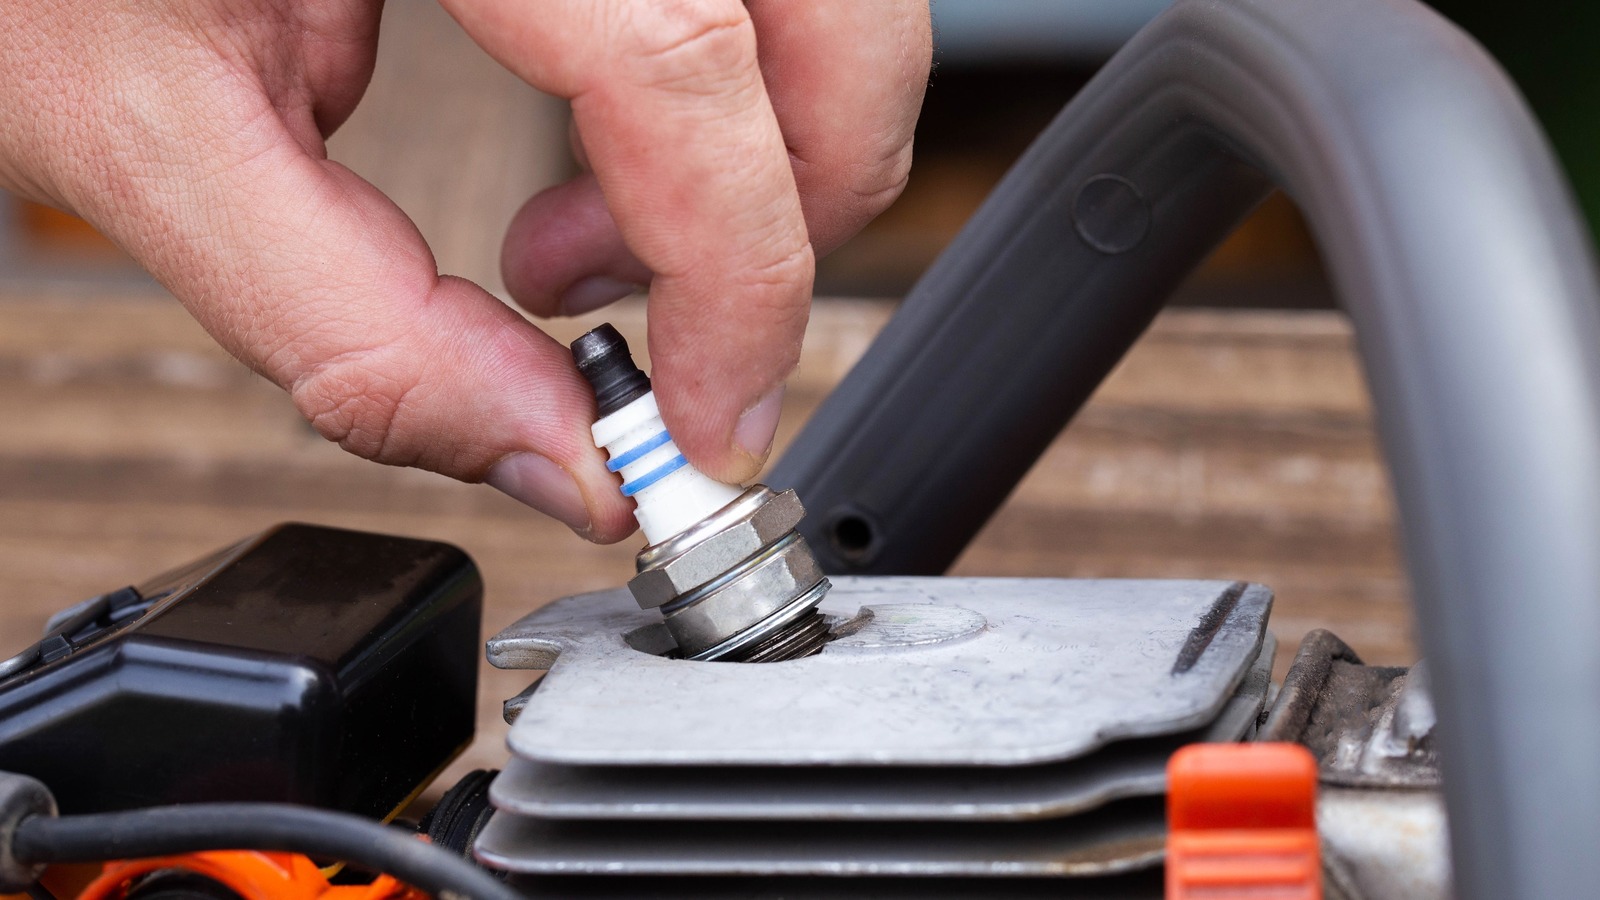 How To Remove A Spark Plug From A Lawnmower